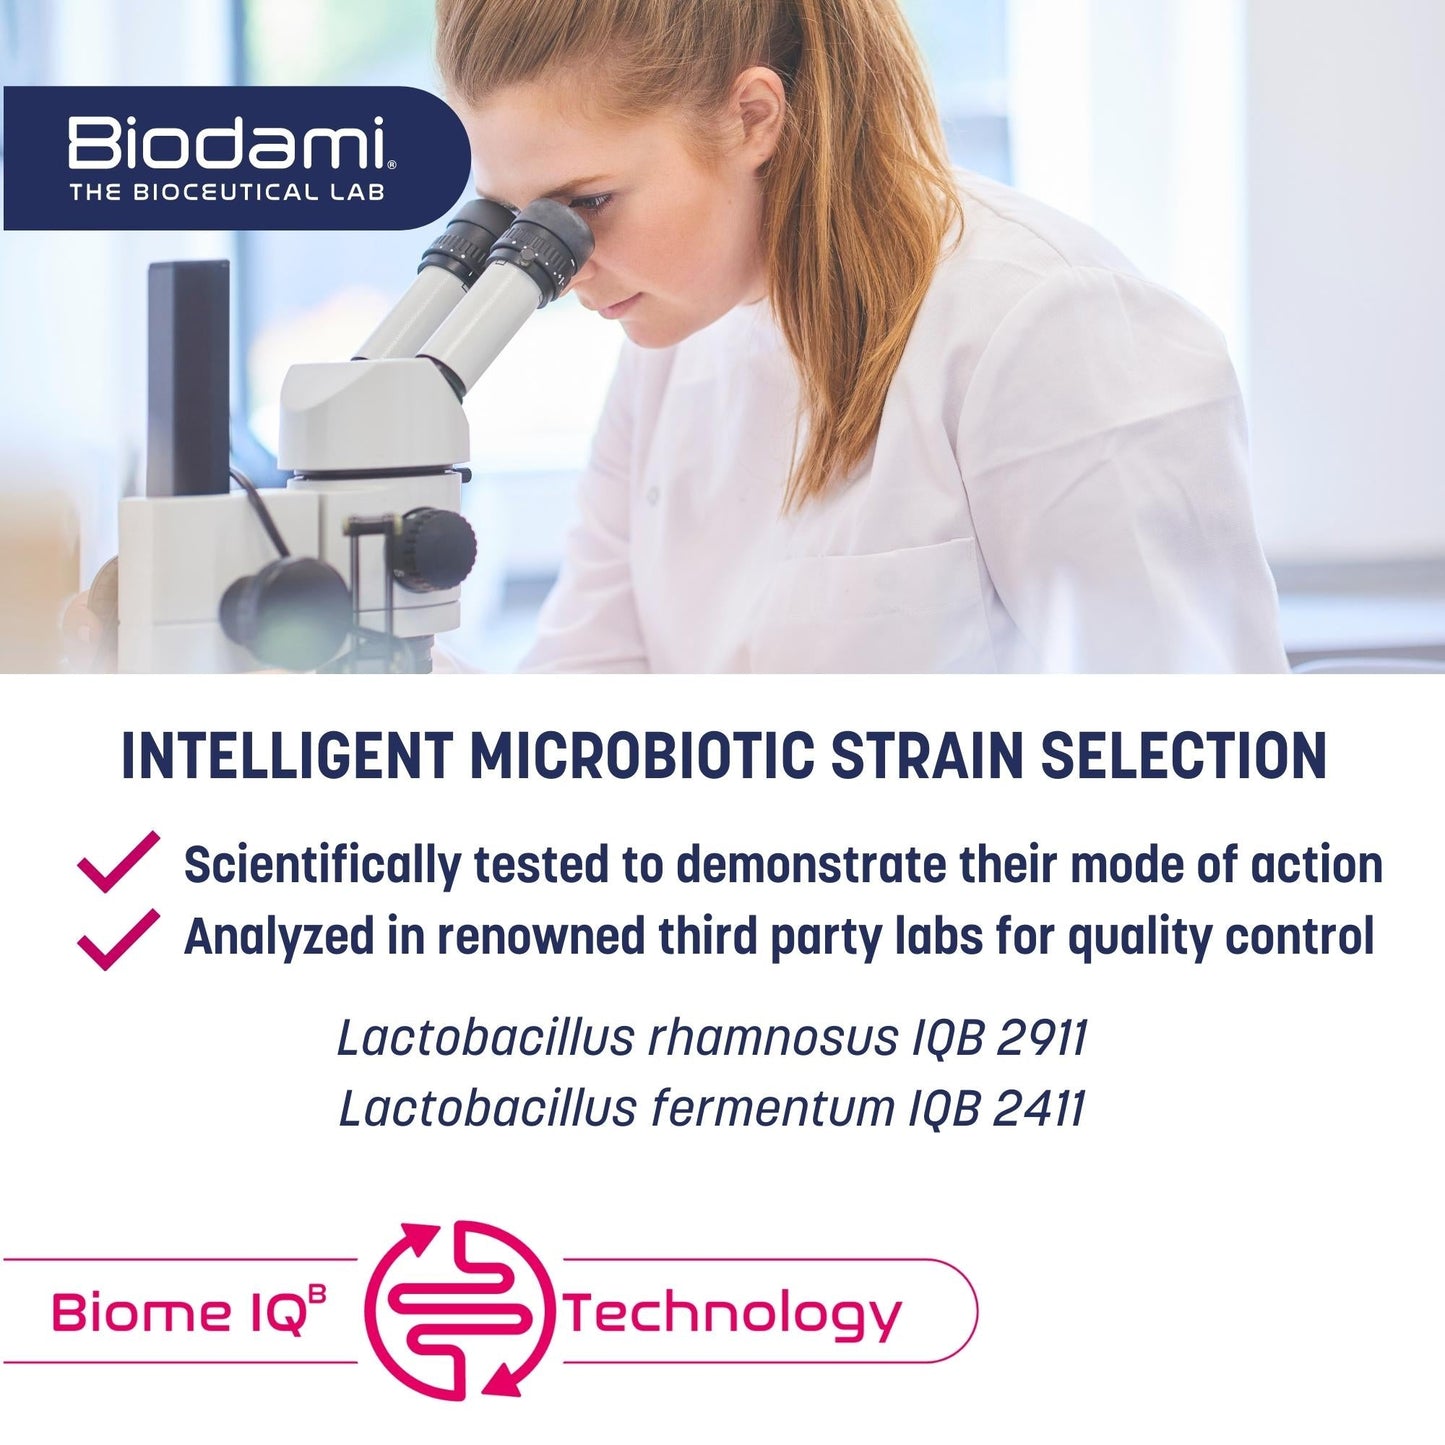 laboratory setting about the intelligent probiotic strain selection, scientifically tested to demonstrate mode of action and quality control 